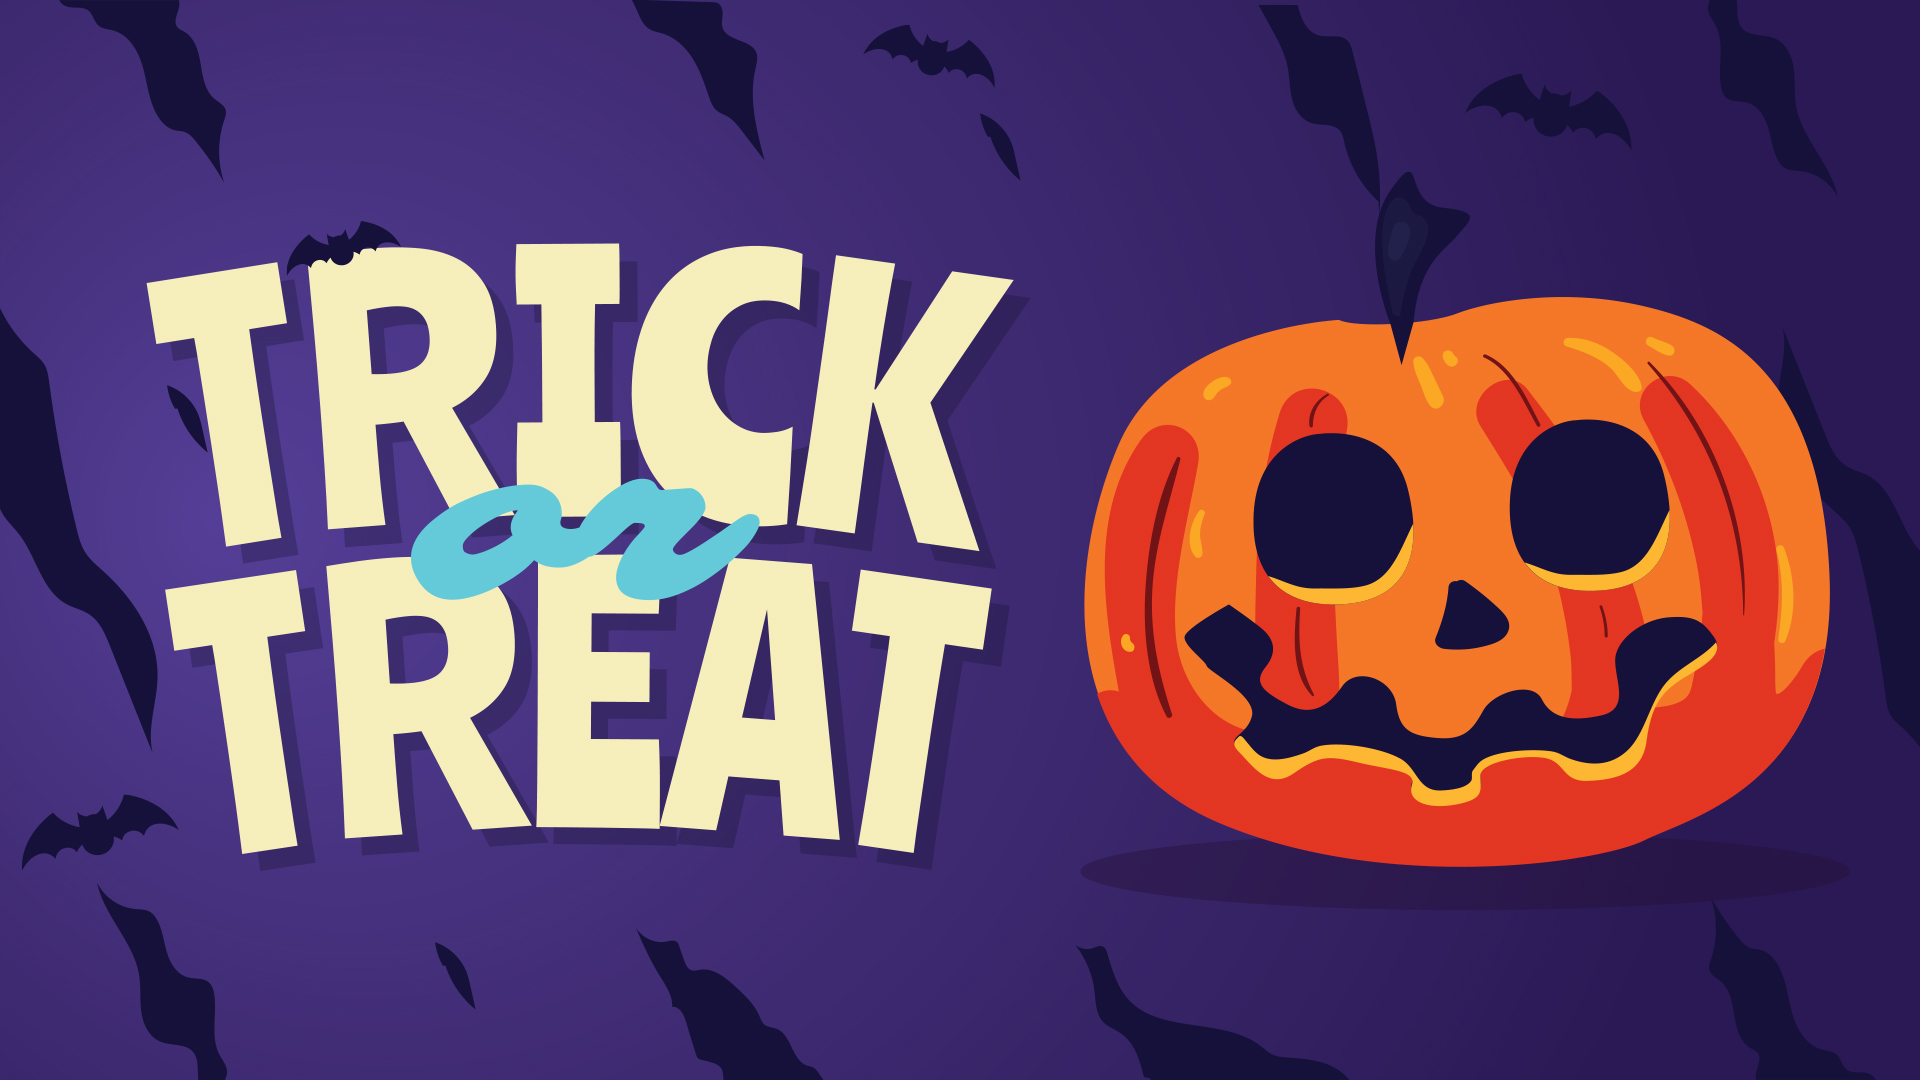 How to Complete the “Trick or Treat” Halloween Event in The Sims